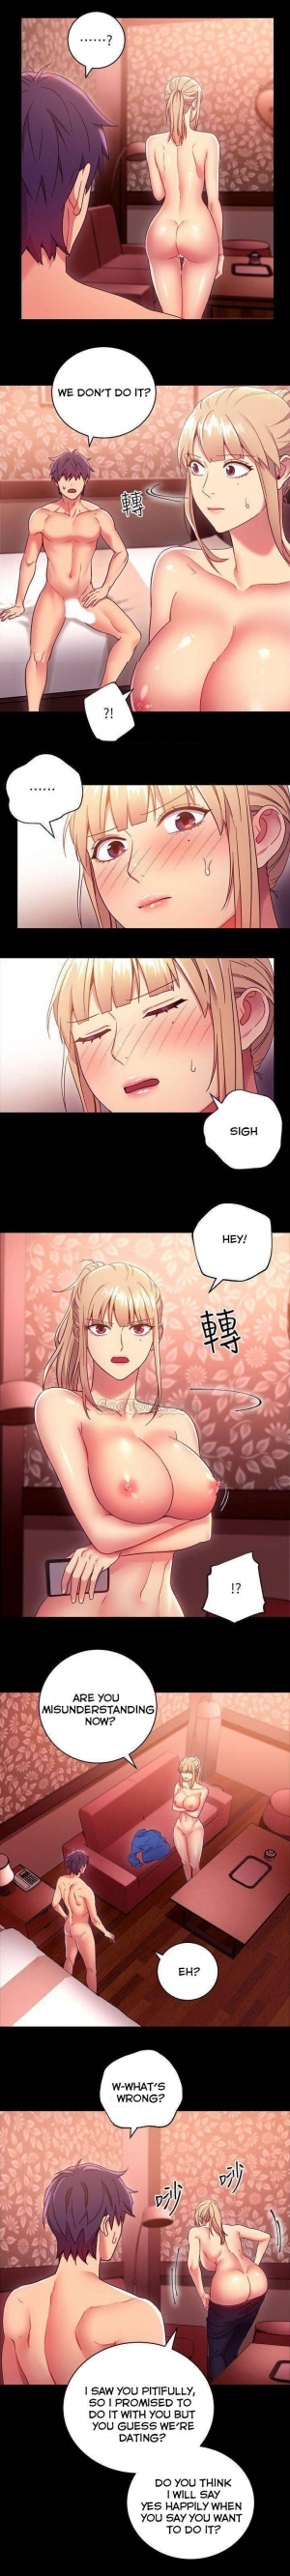  [Neck Pilllow] Stepmother Friends Ch.39/? [English] [Hentai Universe] NEW! 13/10/2020  - Page 139